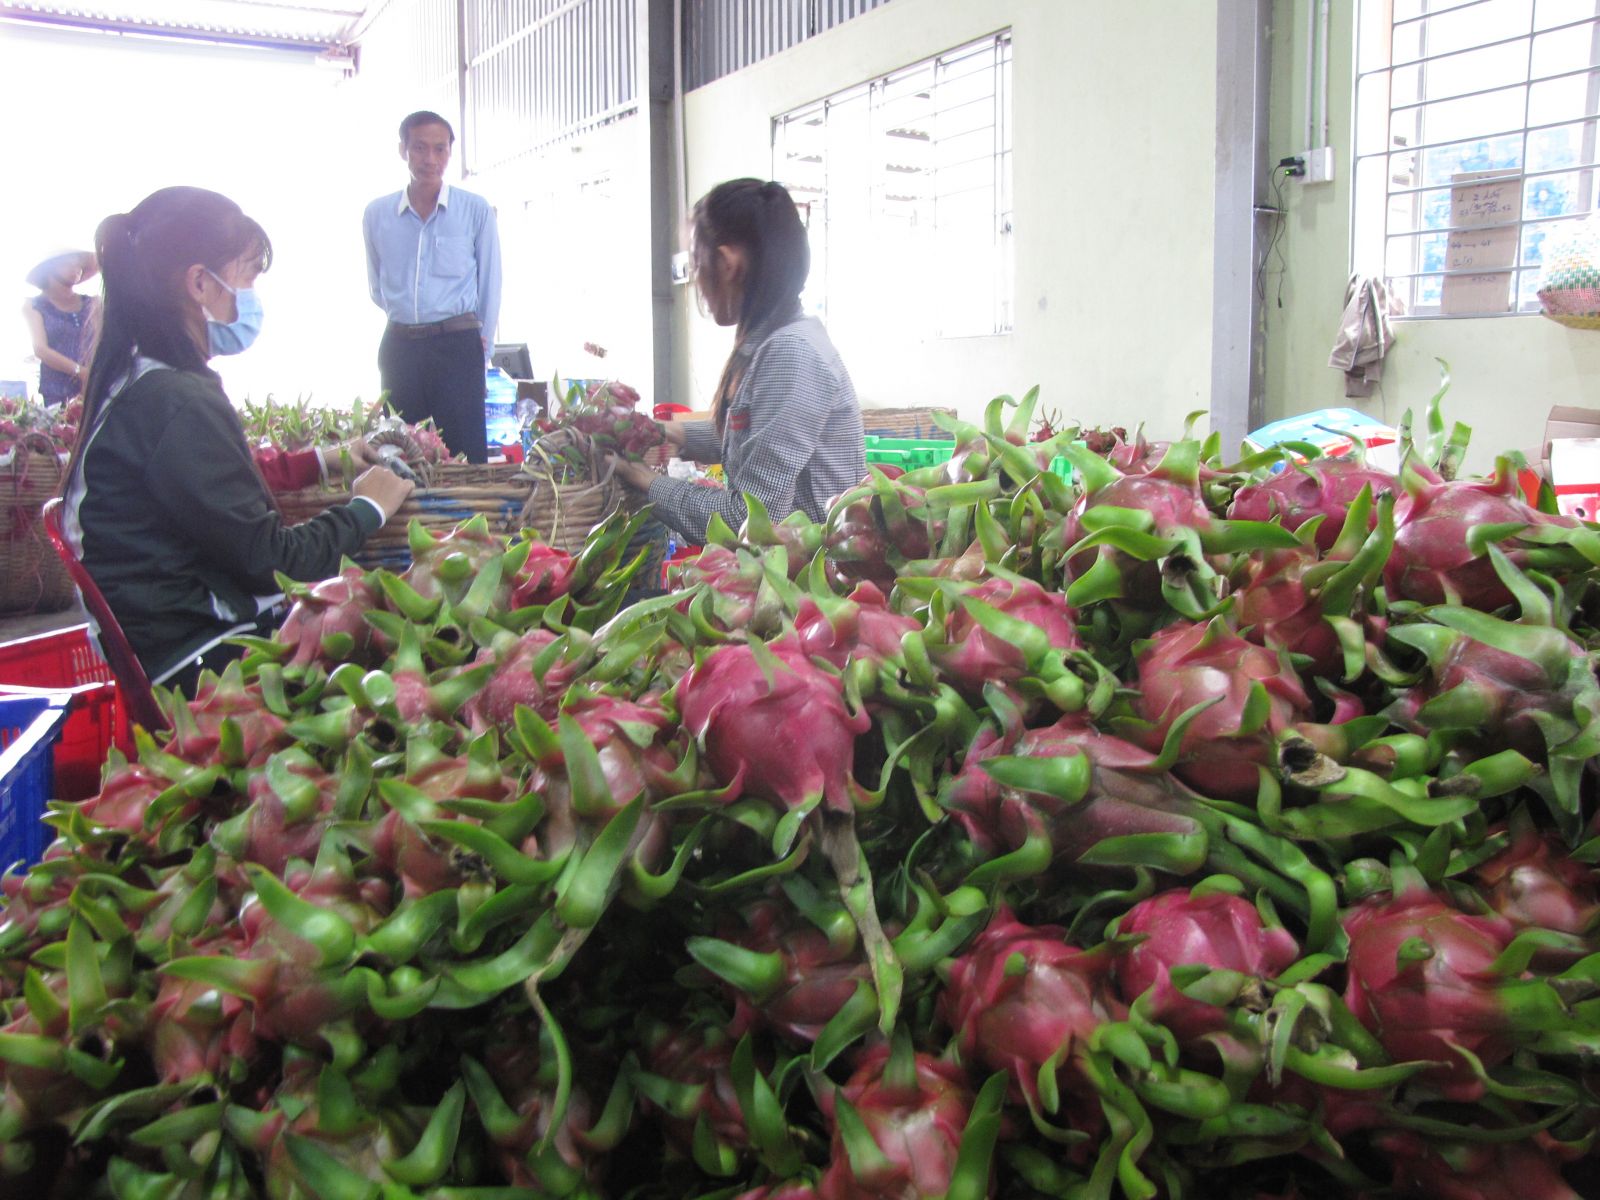 Dragon fruit is one of the main crops of the province with about 11,822 hectares, the fruiting area is about 11,000 hectares.